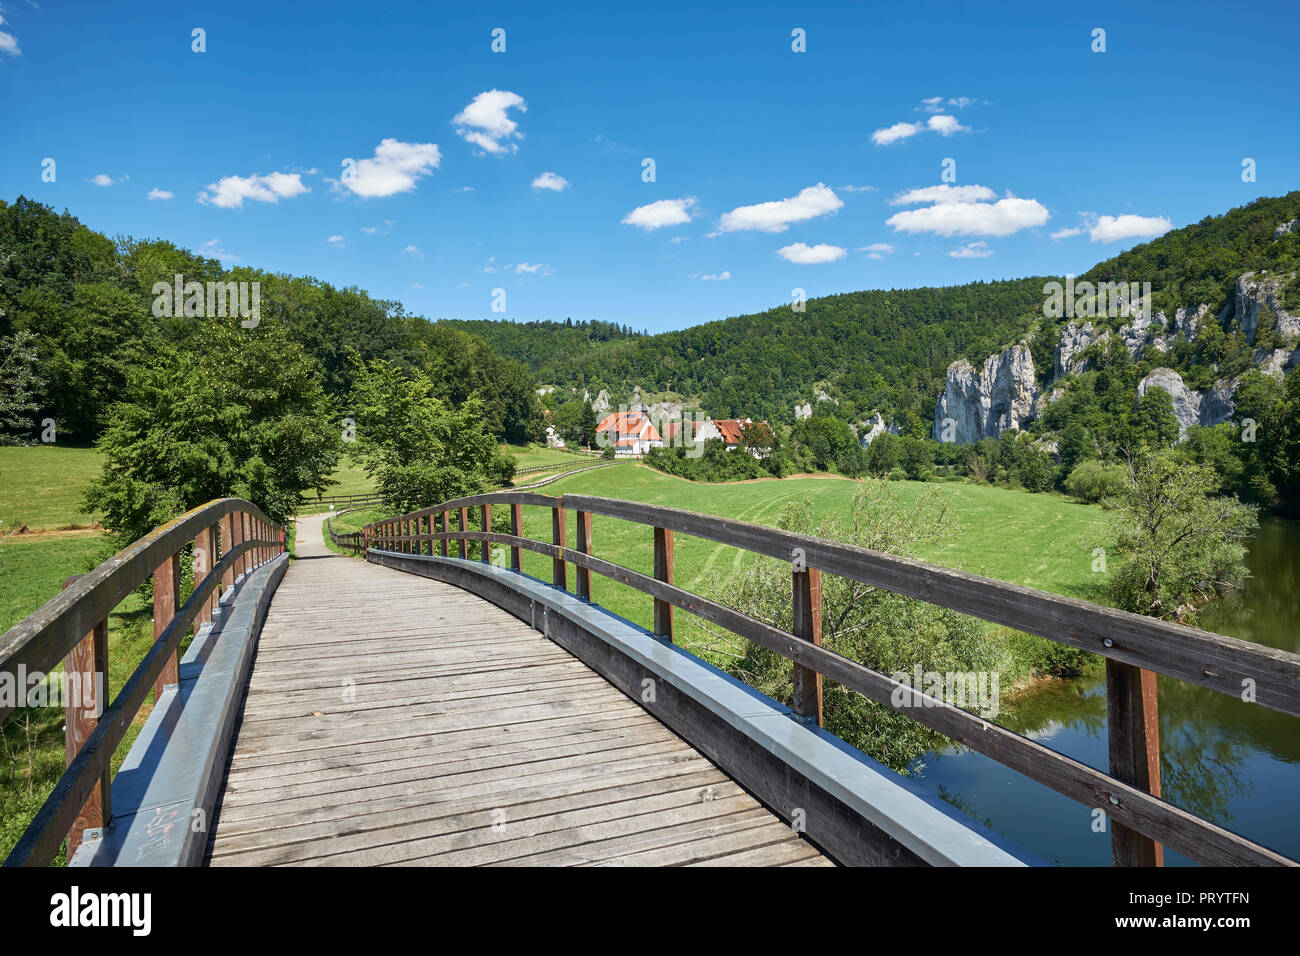 Germany, Baden-Wurttemberg, Sigmaringen district, Pedestrian bridge over Danube river with St.George's Basilica in background Stock Photo